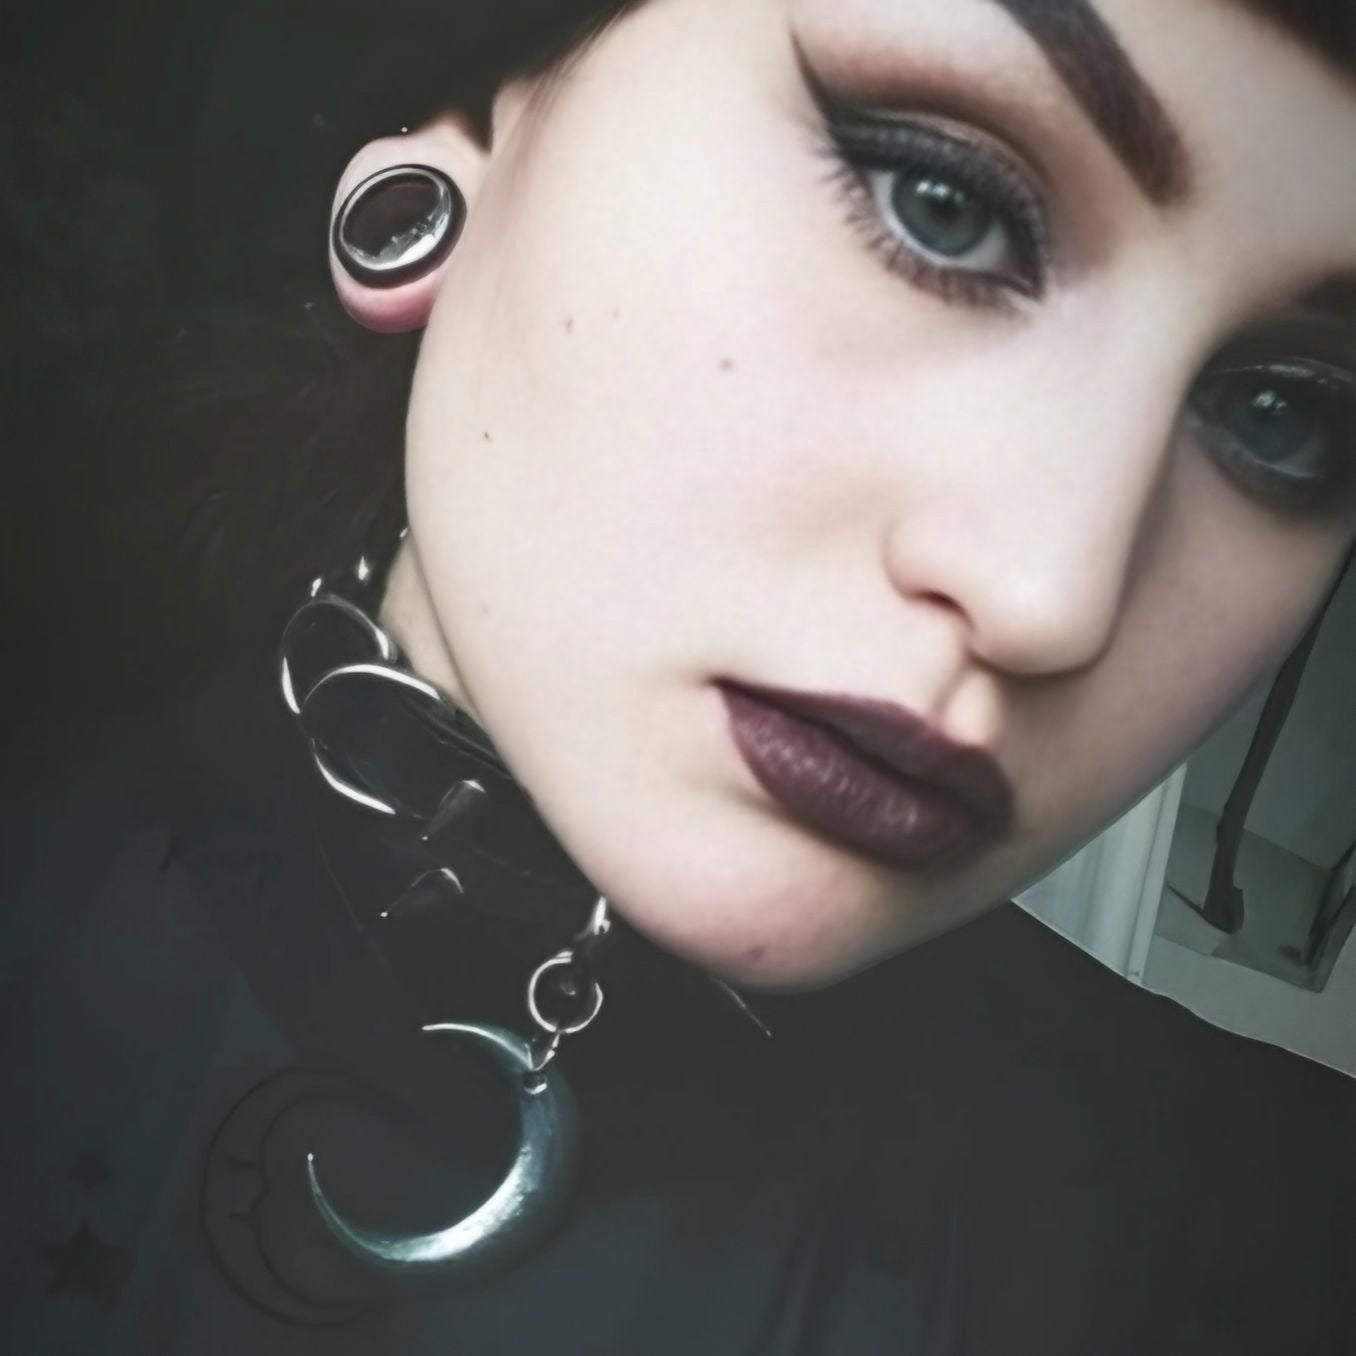 Gothic Leather Choker With Crescent Moon Pendant & Metal D-Rings